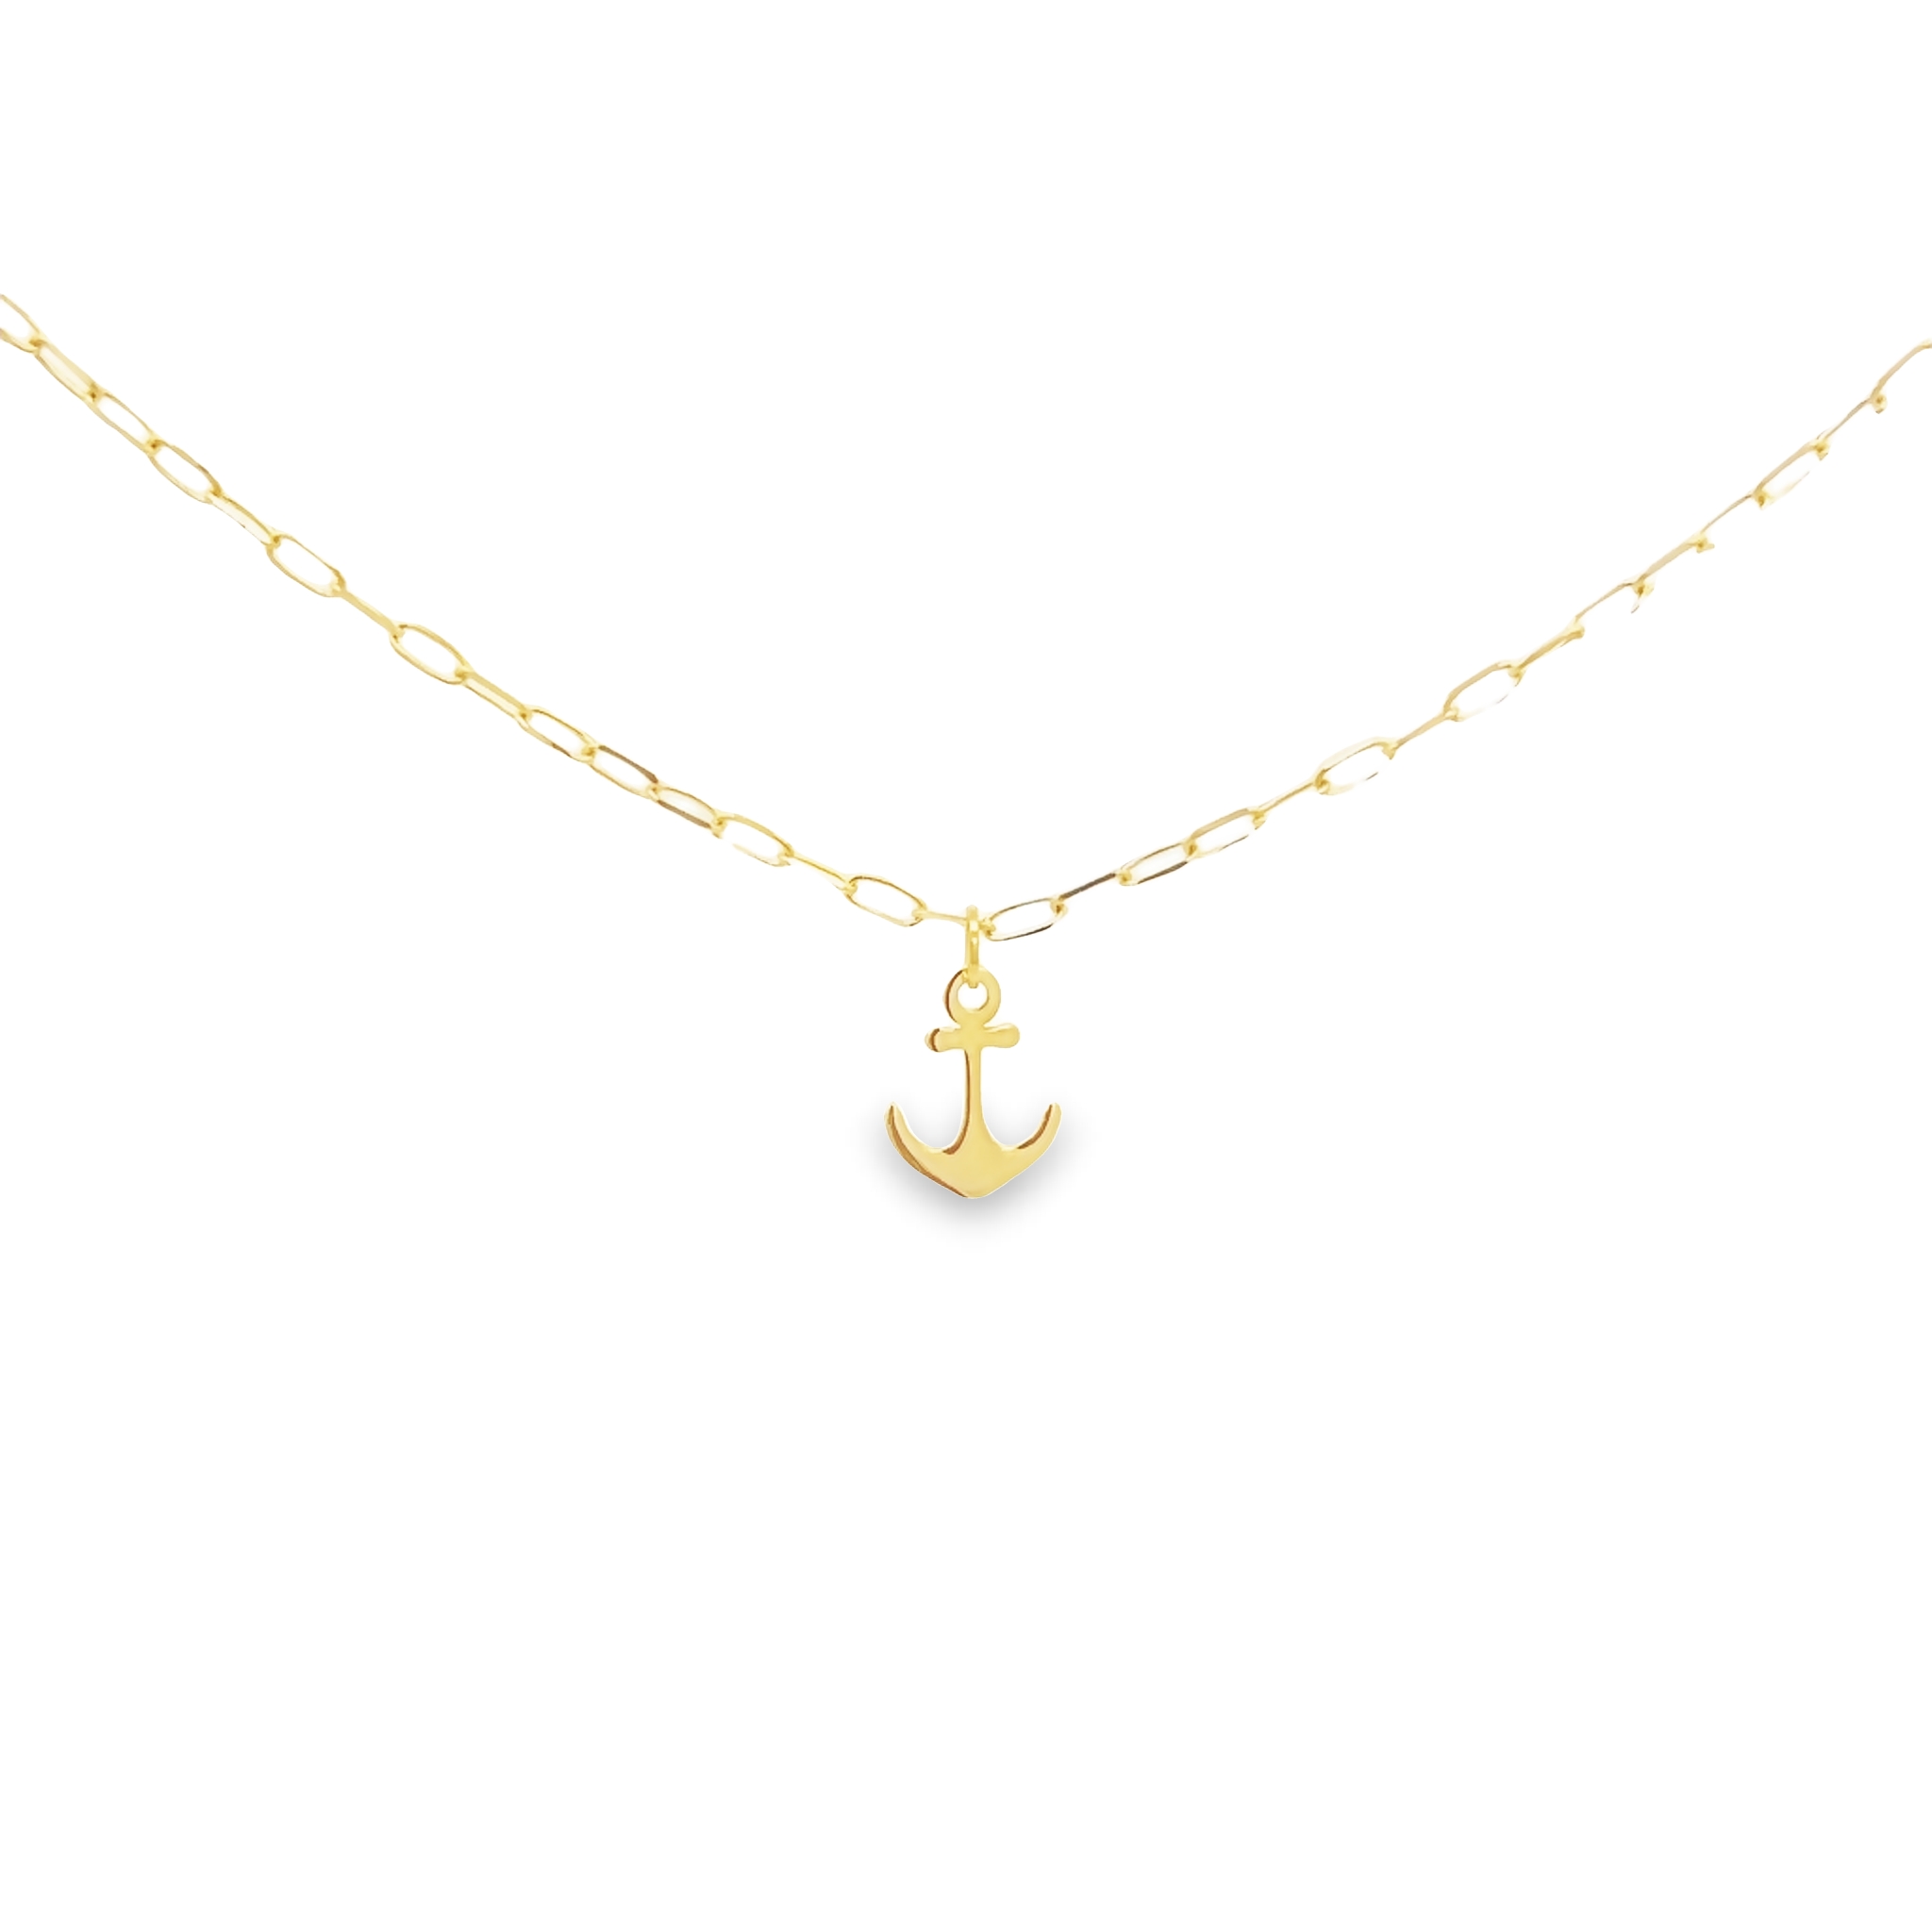 14 karat yellow gold paperclip chain with anchor charm.